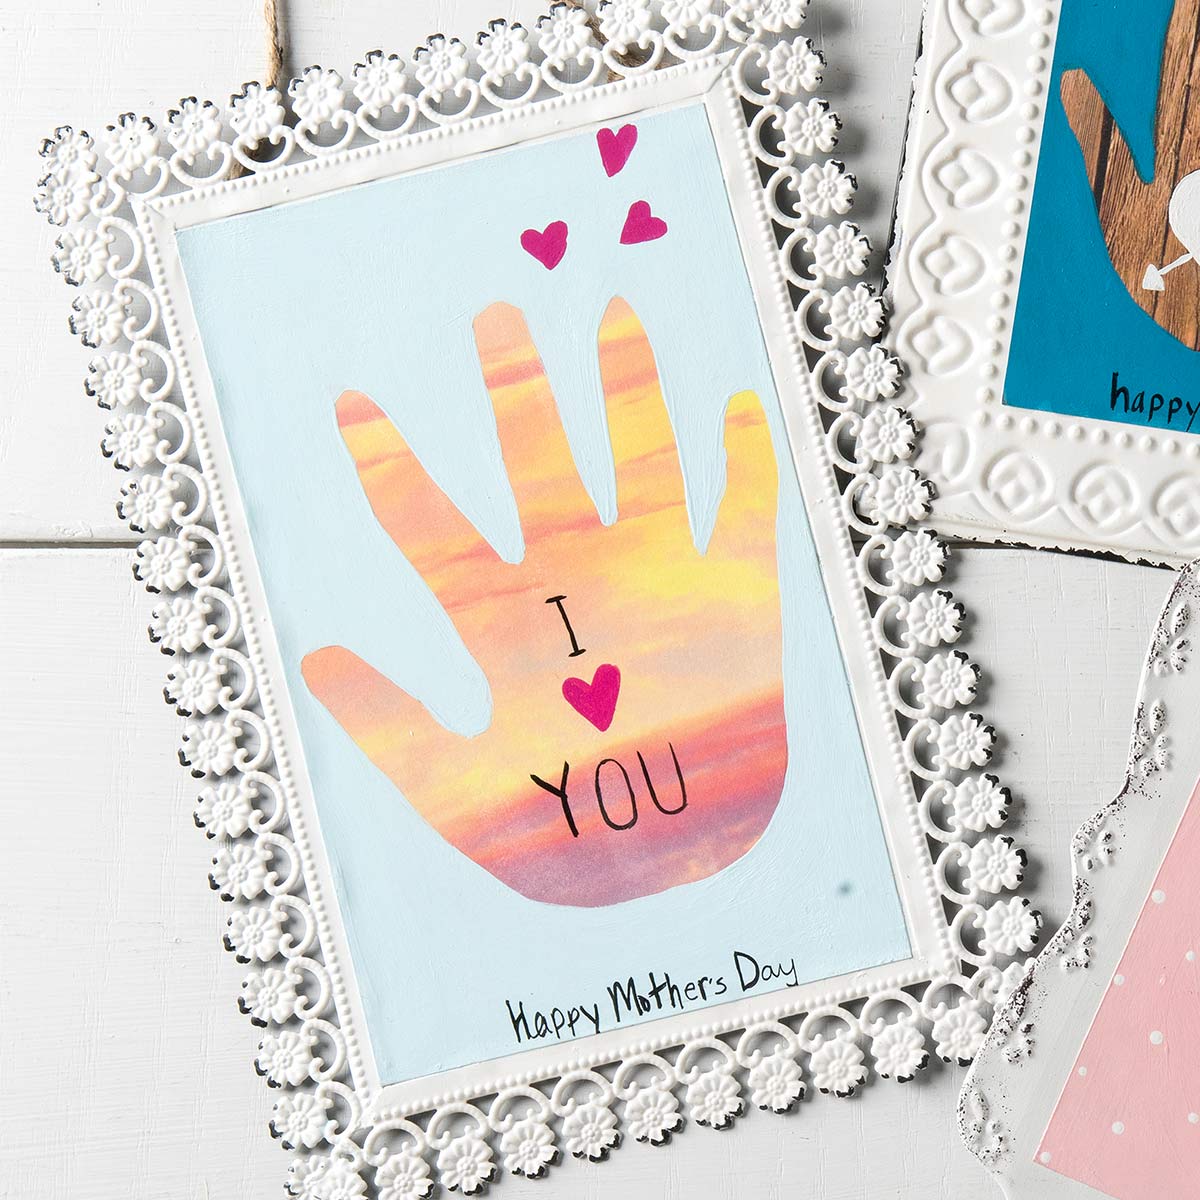 Mother's Day Handprint Craft Project for Kids